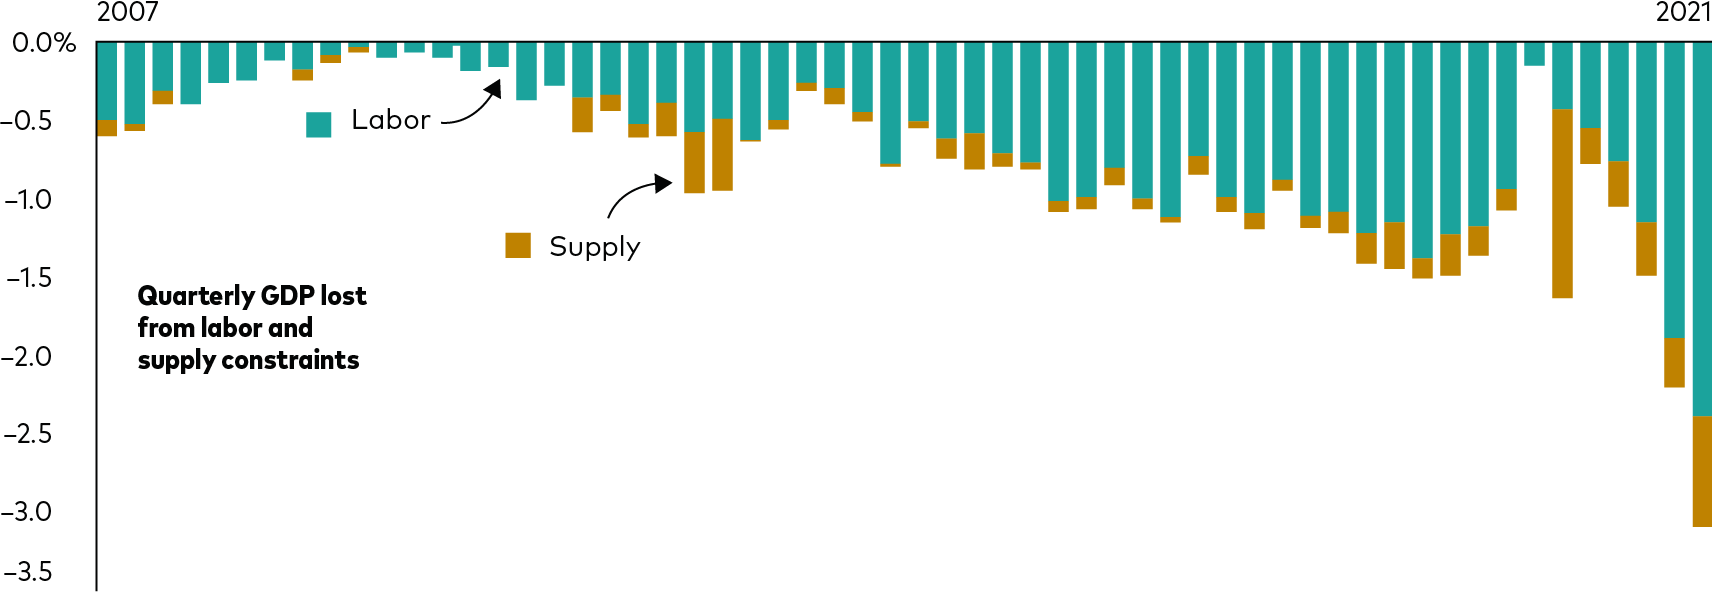 The chart depicts quarterly GDP lost to labor and supply constraints since 2007, just before the global financial crisis. Supply constraints have been significant lately, and especially right at the outset of the COVID-19 pandemic in the first half of 2020. Now, though, the shortage of workers is starting to influence Vanguard’s forecasts more significantly.